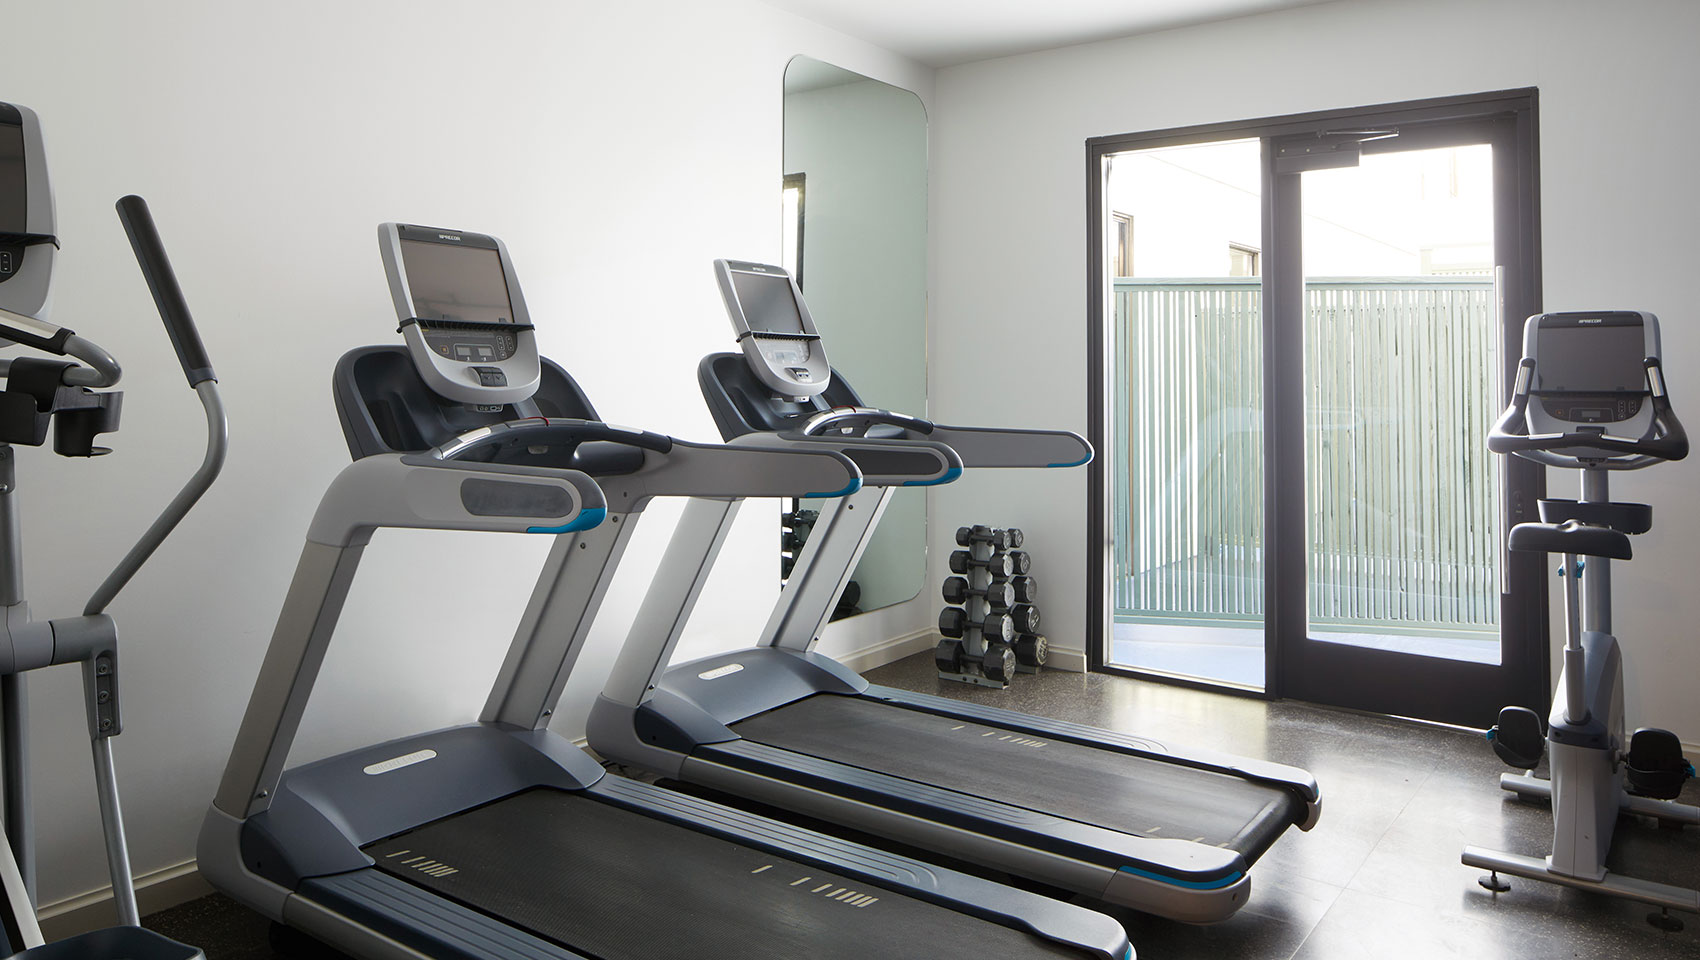 enso fitness room with gym equipment